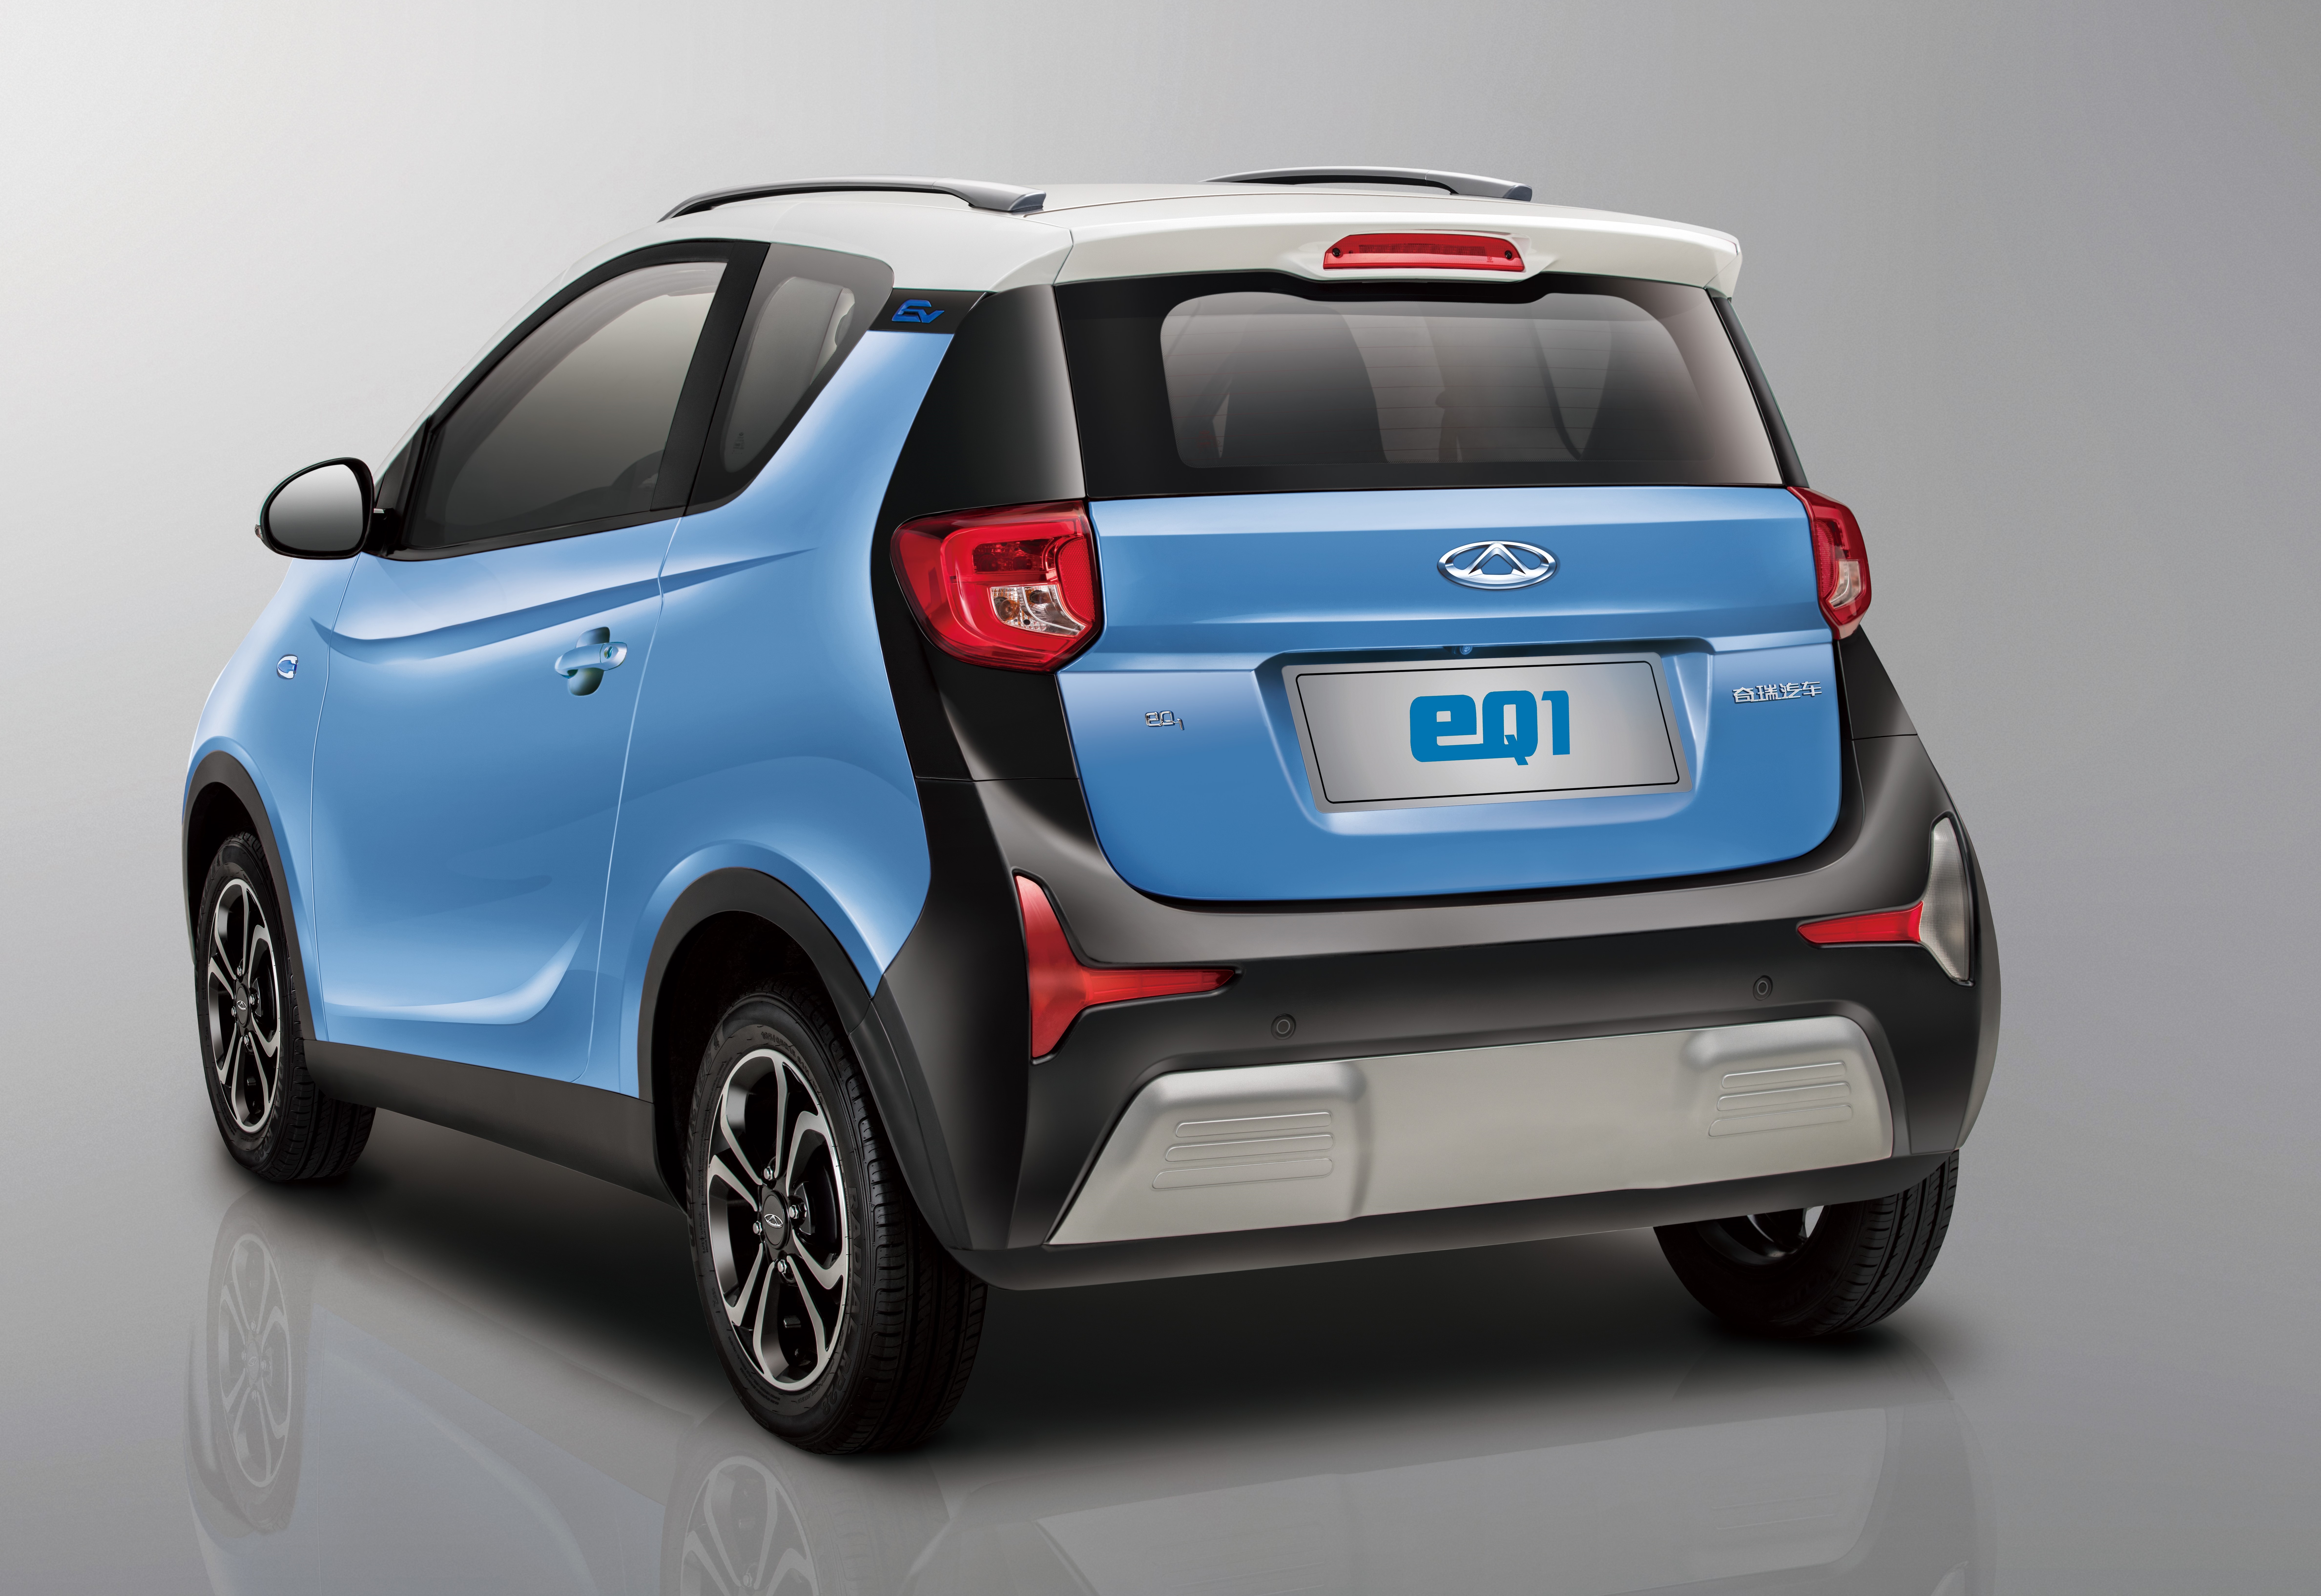 The companies plan to investigate applications for the Chery eQ1 electric vehicle.